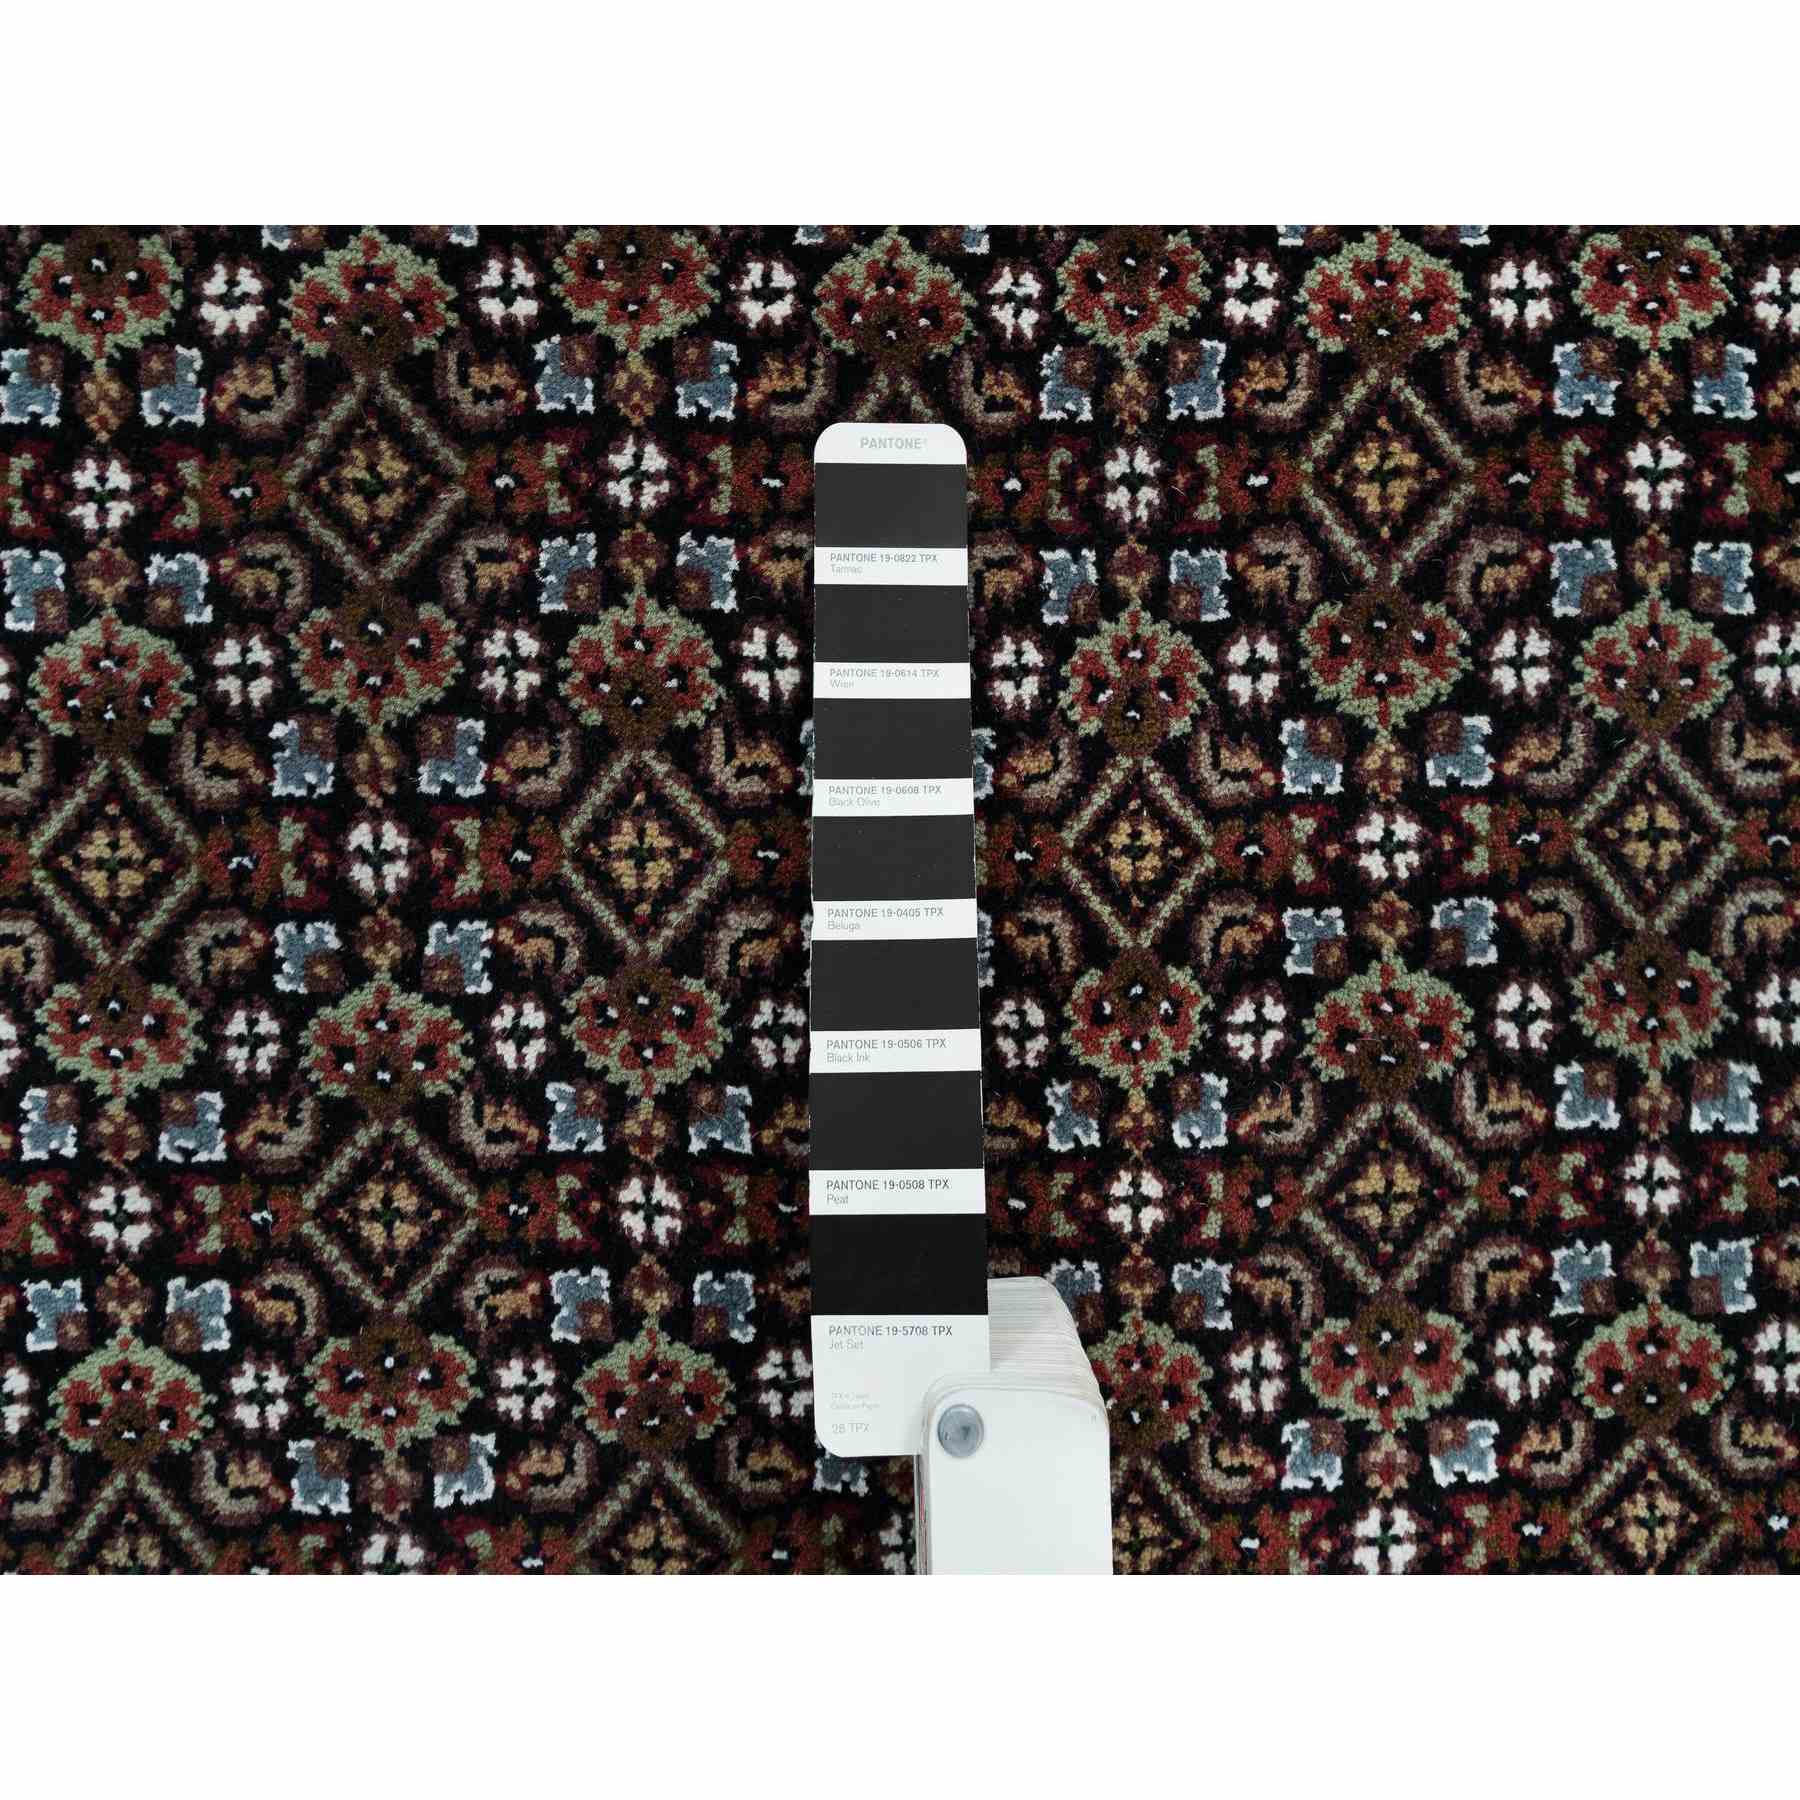 Fine-Oriental-Hand-Knotted-Rug-329040